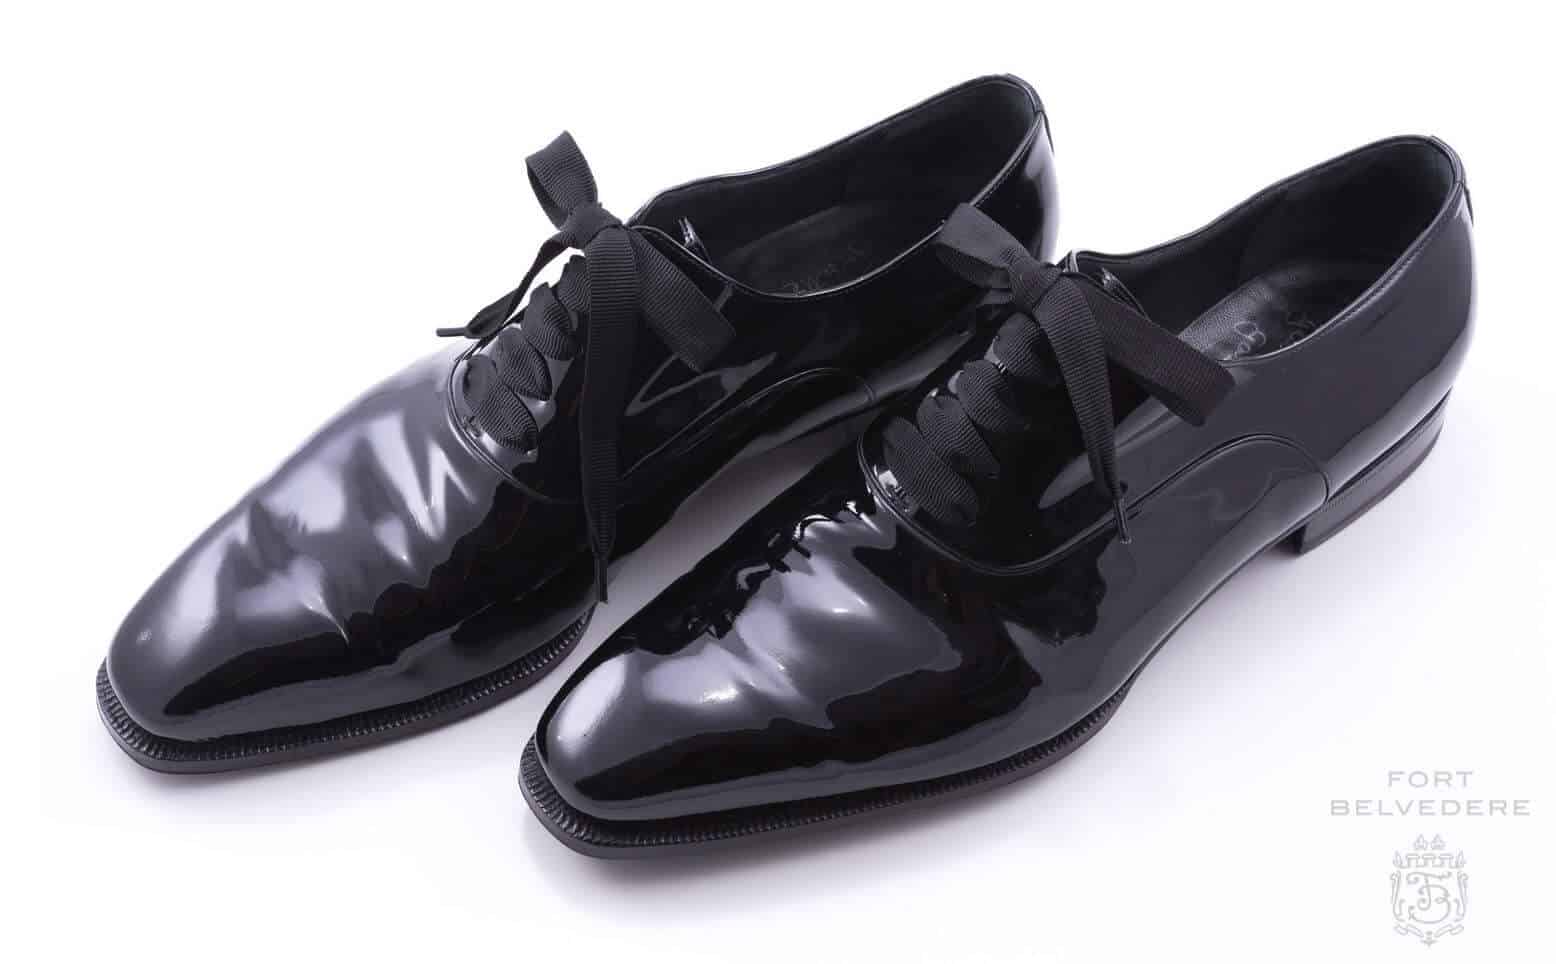 Tuxedo Oxford Patent Leather Plain Toe Wedding Dress Shoes for Men Lace up Comfortable Formal Business Shoes